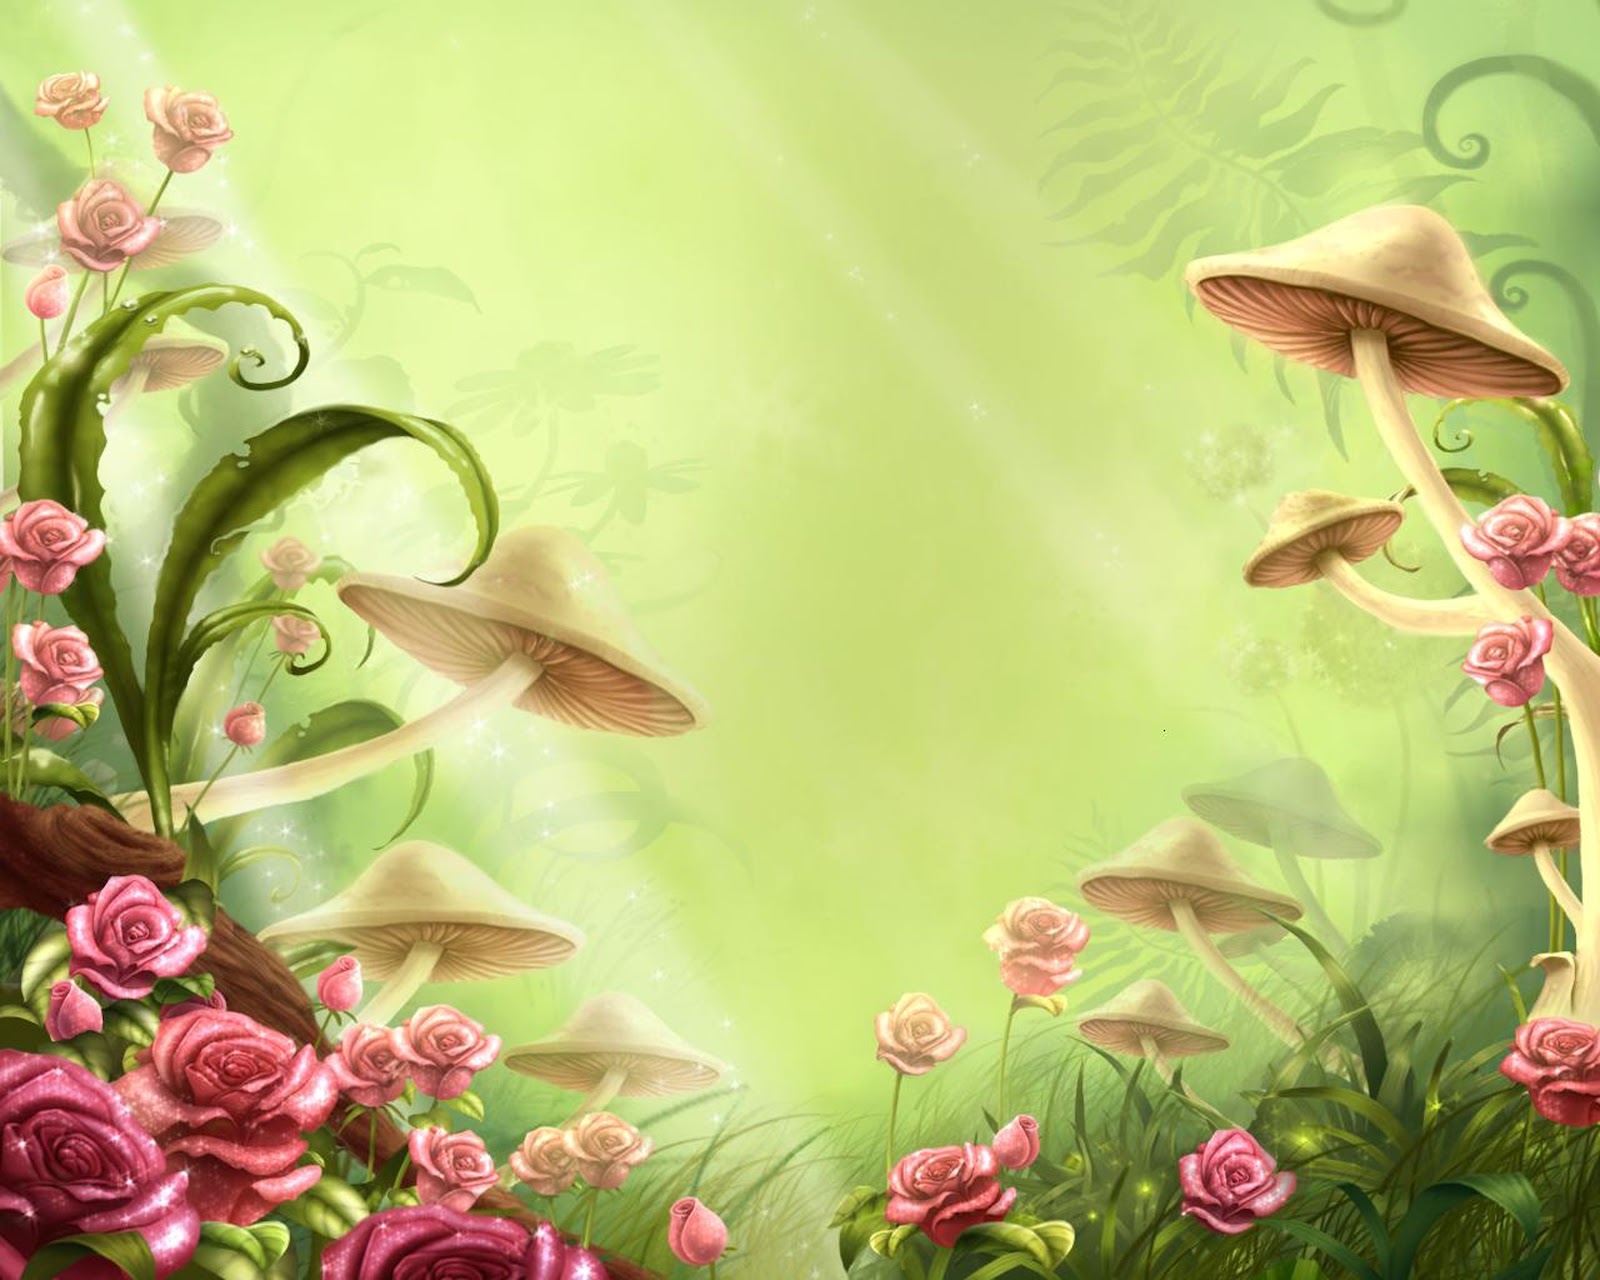 Wallpapers fairy backgrounds Central Photoshop